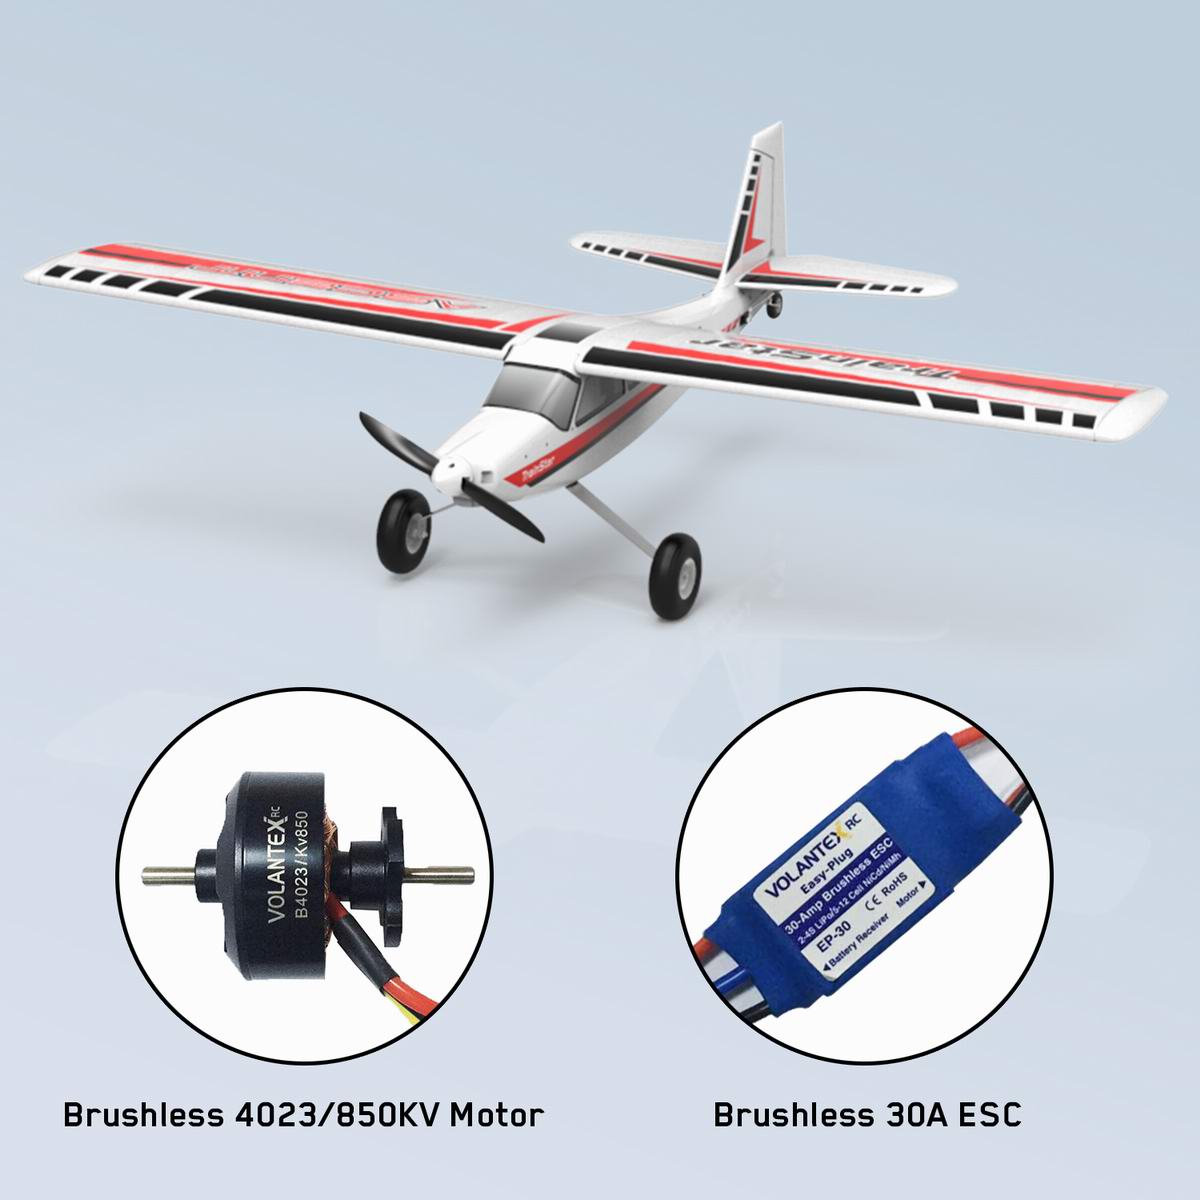 ASCENT 1400MM 4 Channel RC Airplane with Over-Grade Power System and Plasitc Fuselage (747-8) PNP.